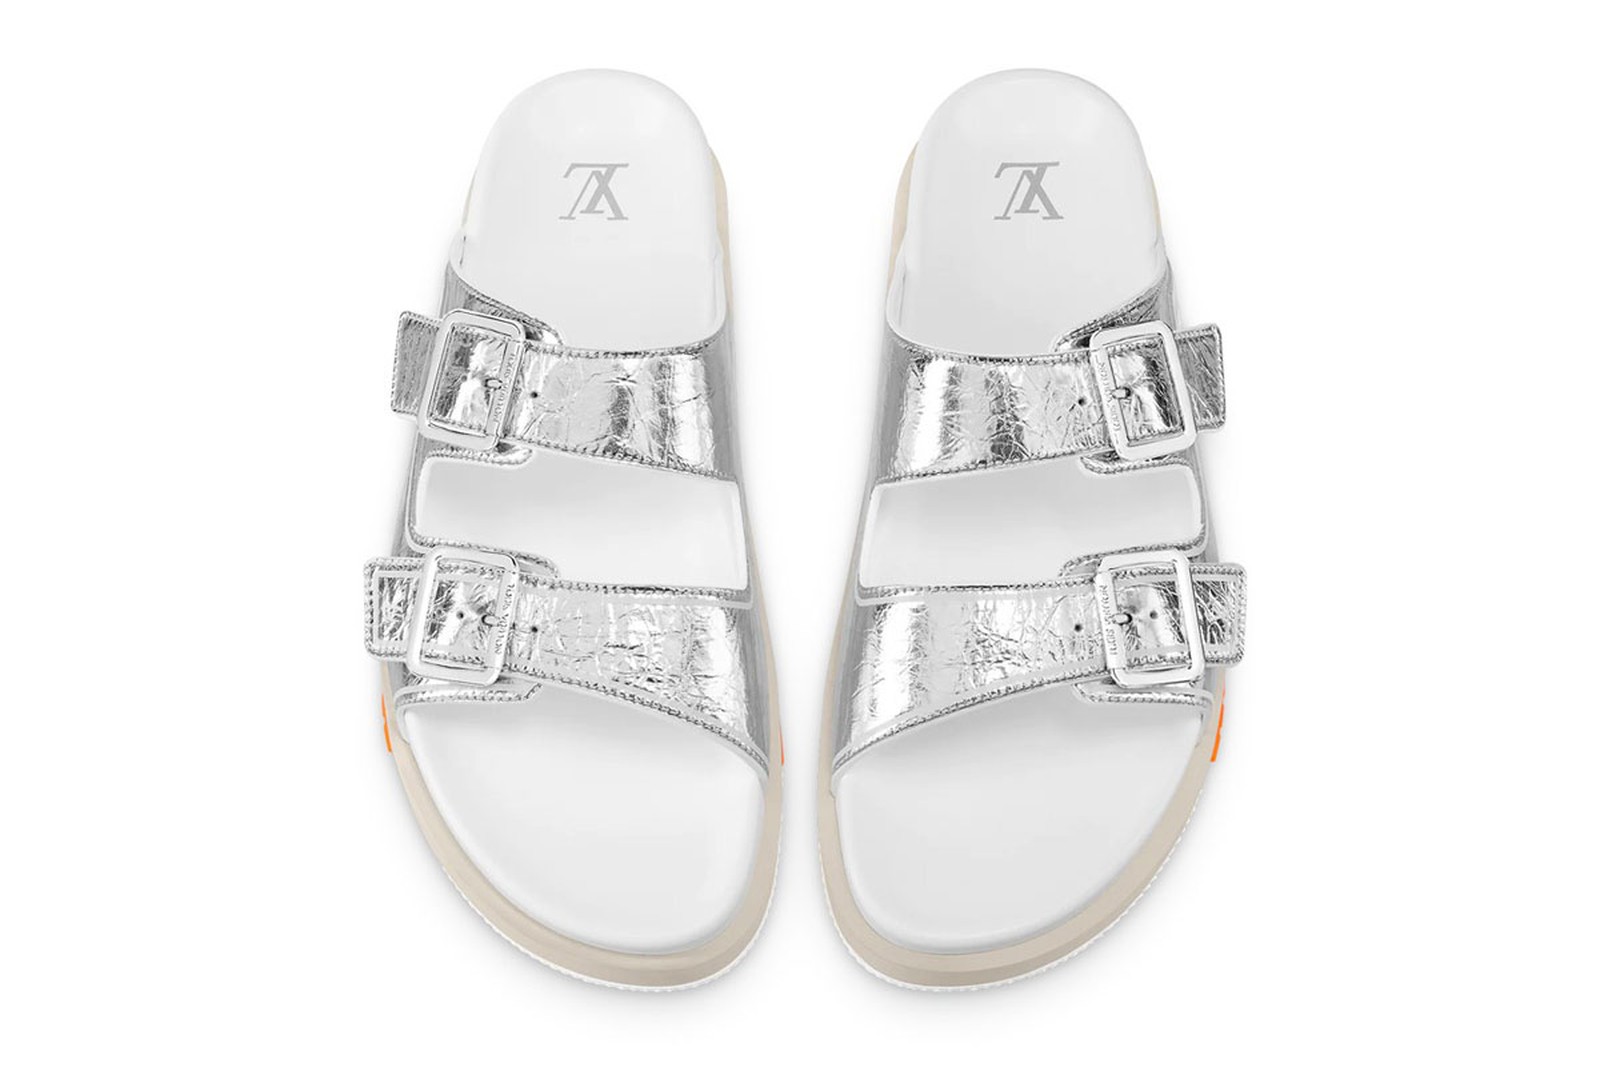 Kitlife Louis Vuitton Beverly Hills Trainers Sneaker White/Grey